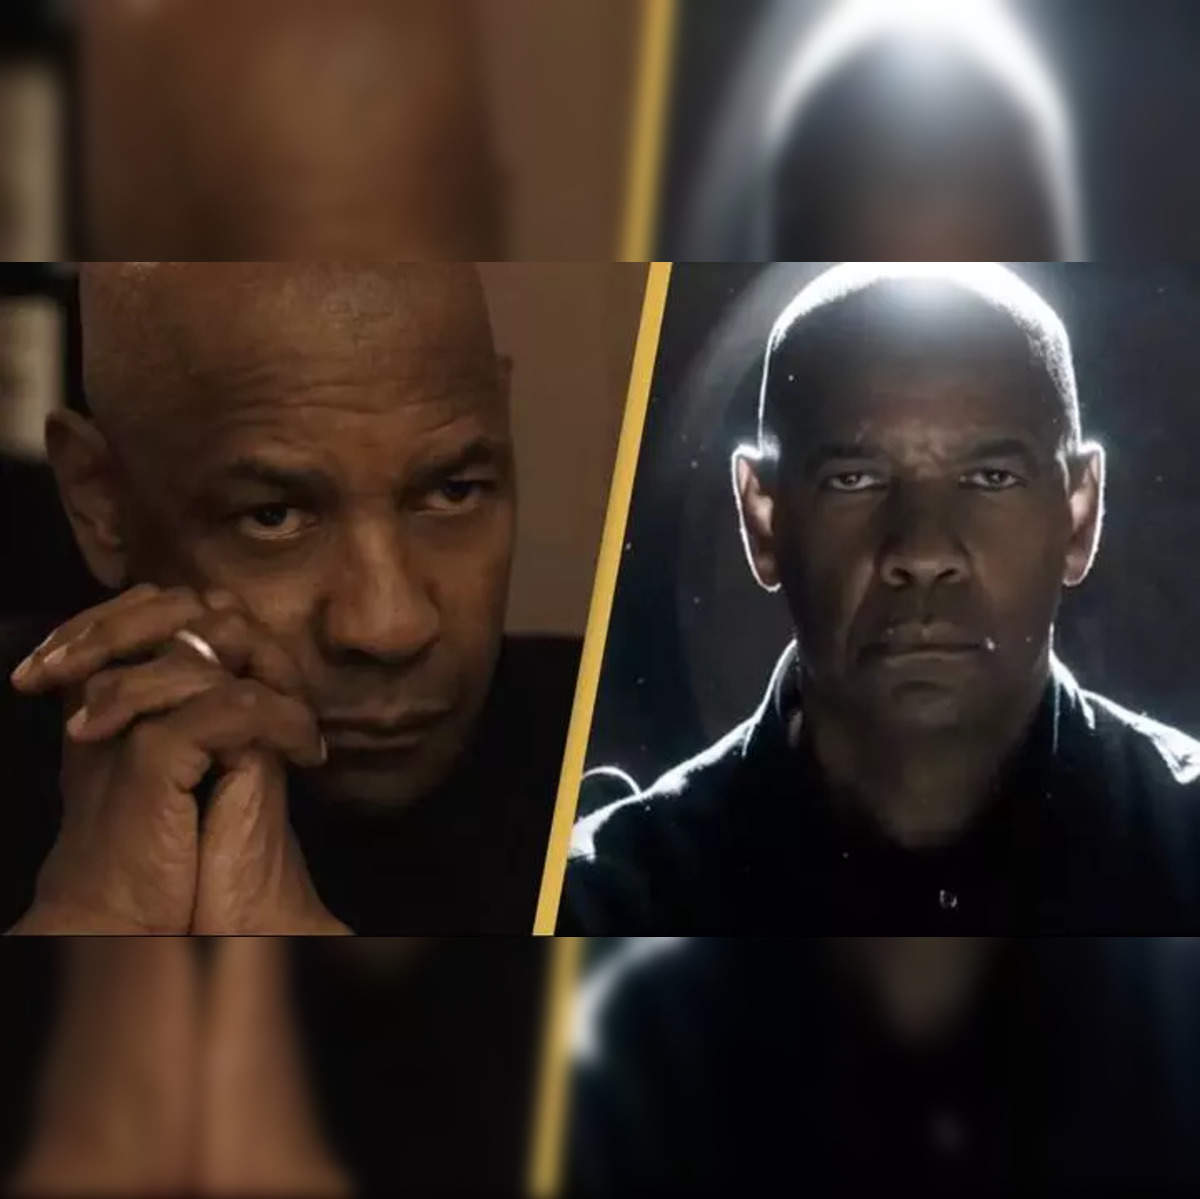 The Equalizer 2 streaming: where to watch online?